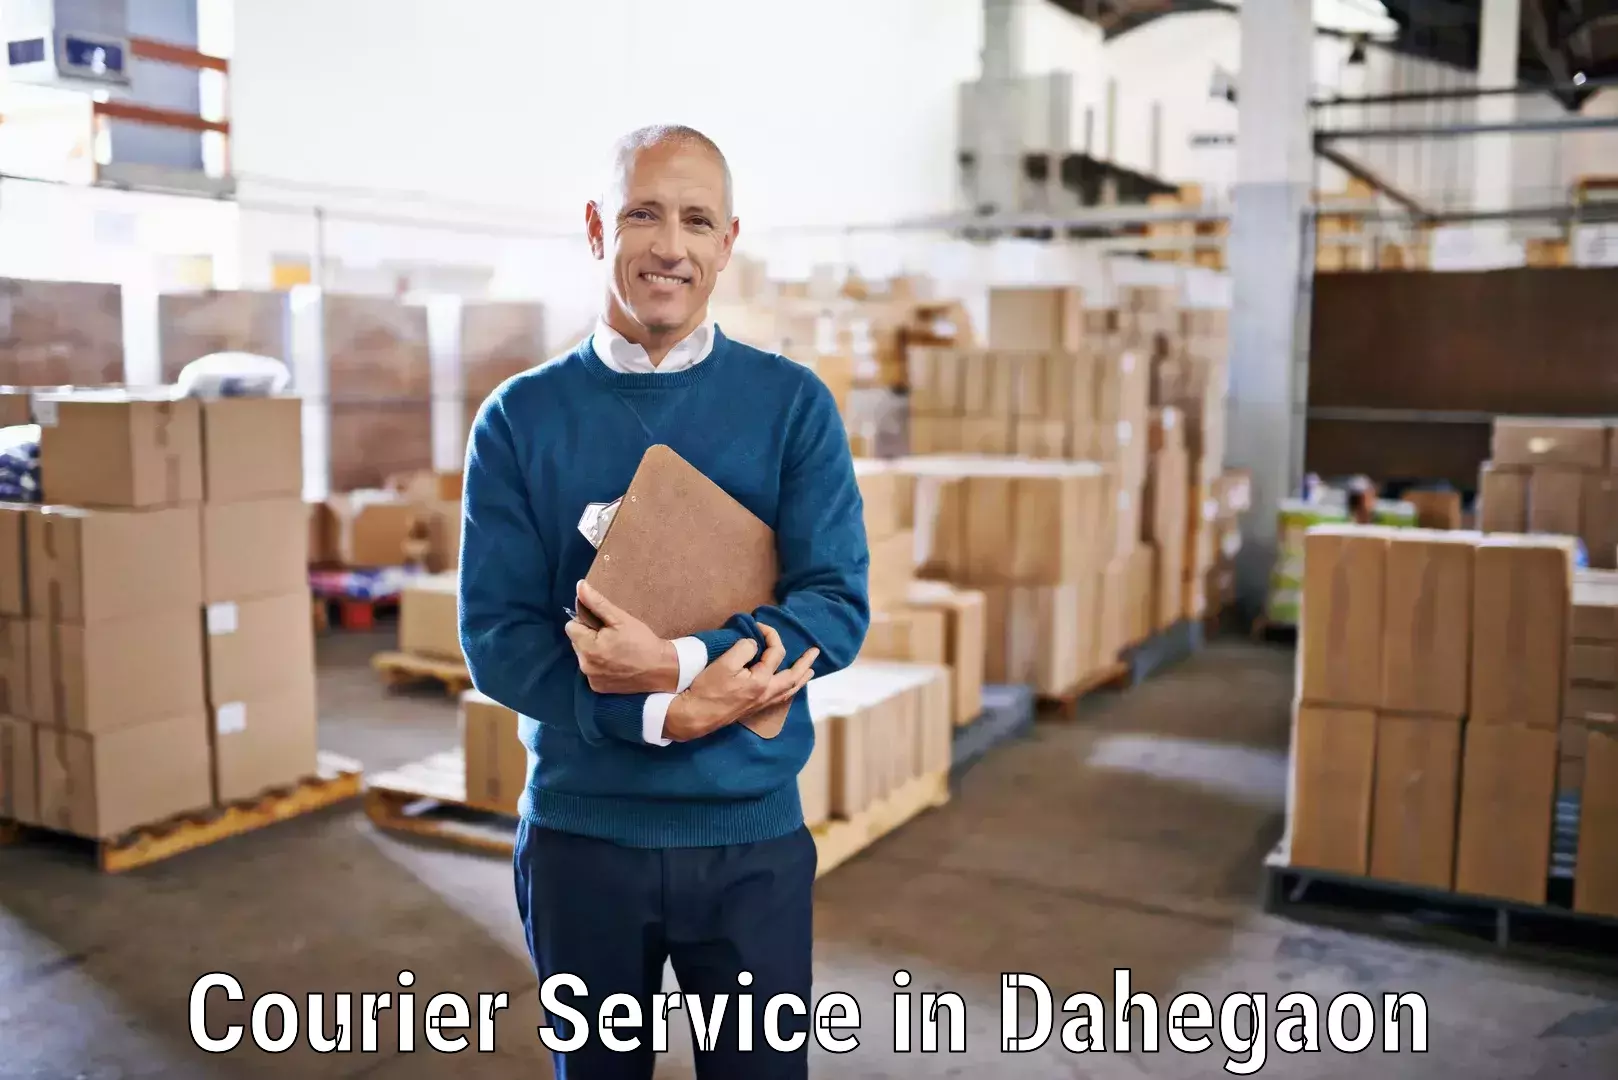 Efficient package consolidation in Dahegaon